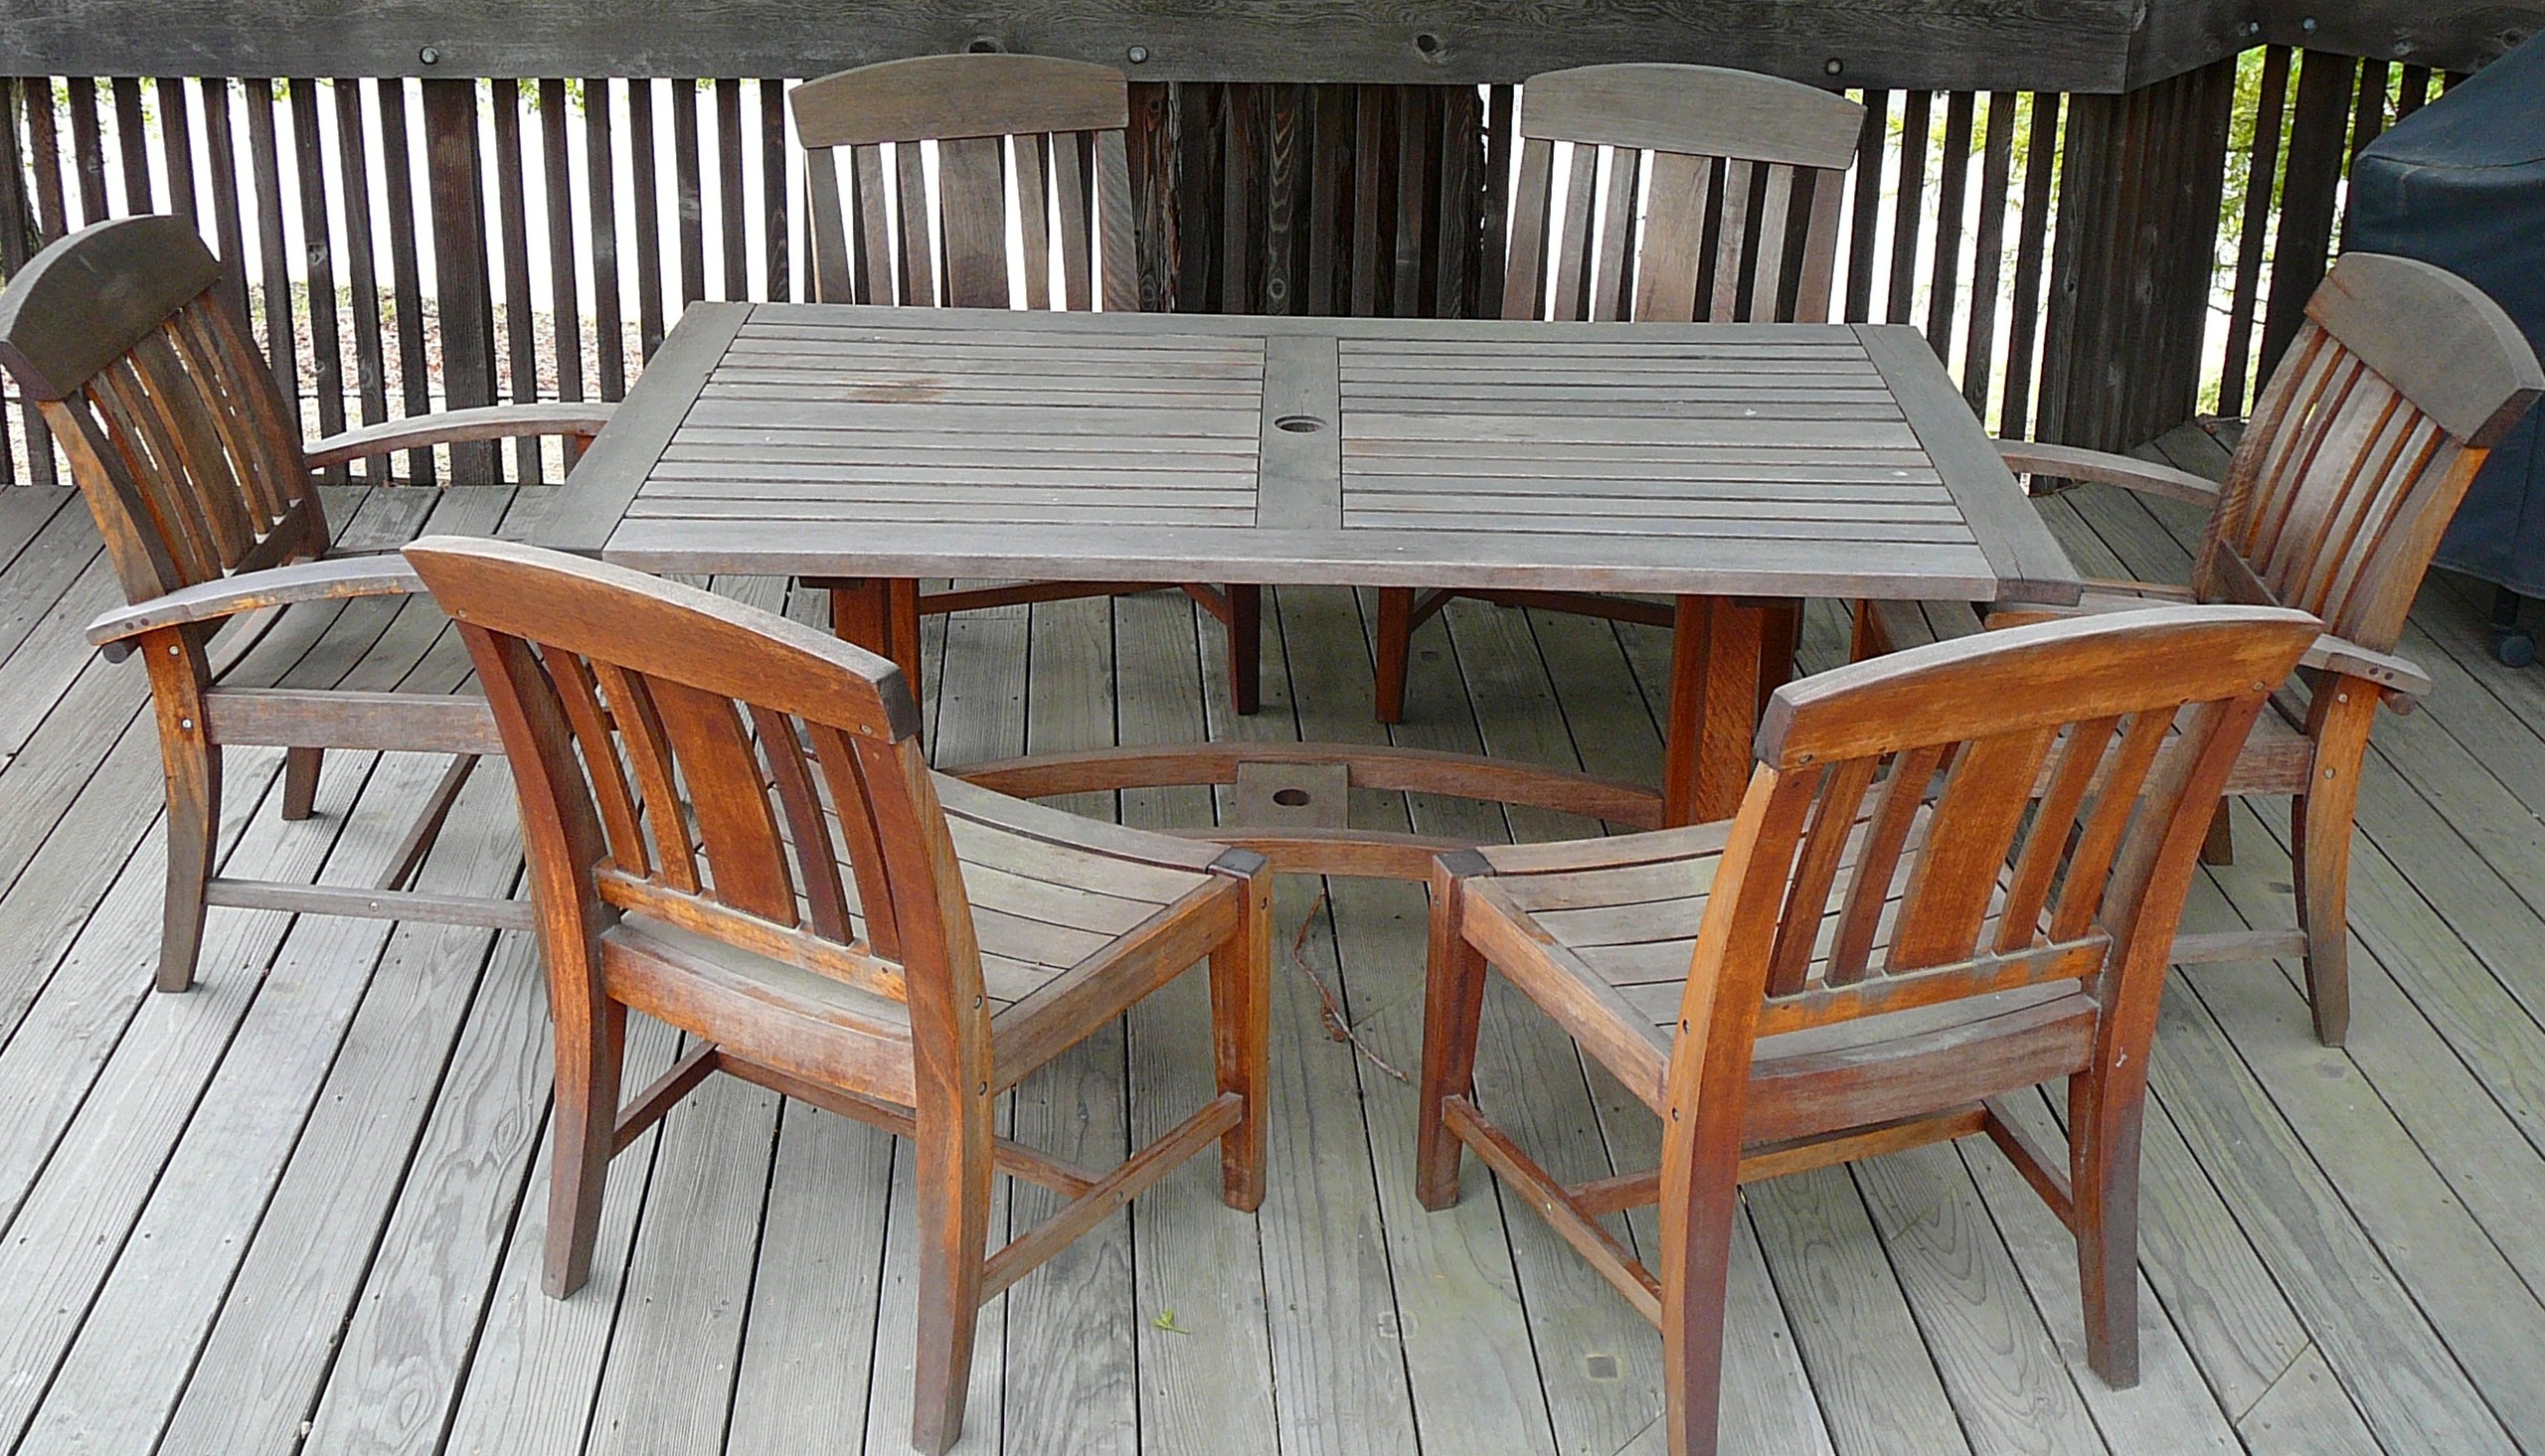 The Benefits Of Investing In Teak Outdoor Furniture